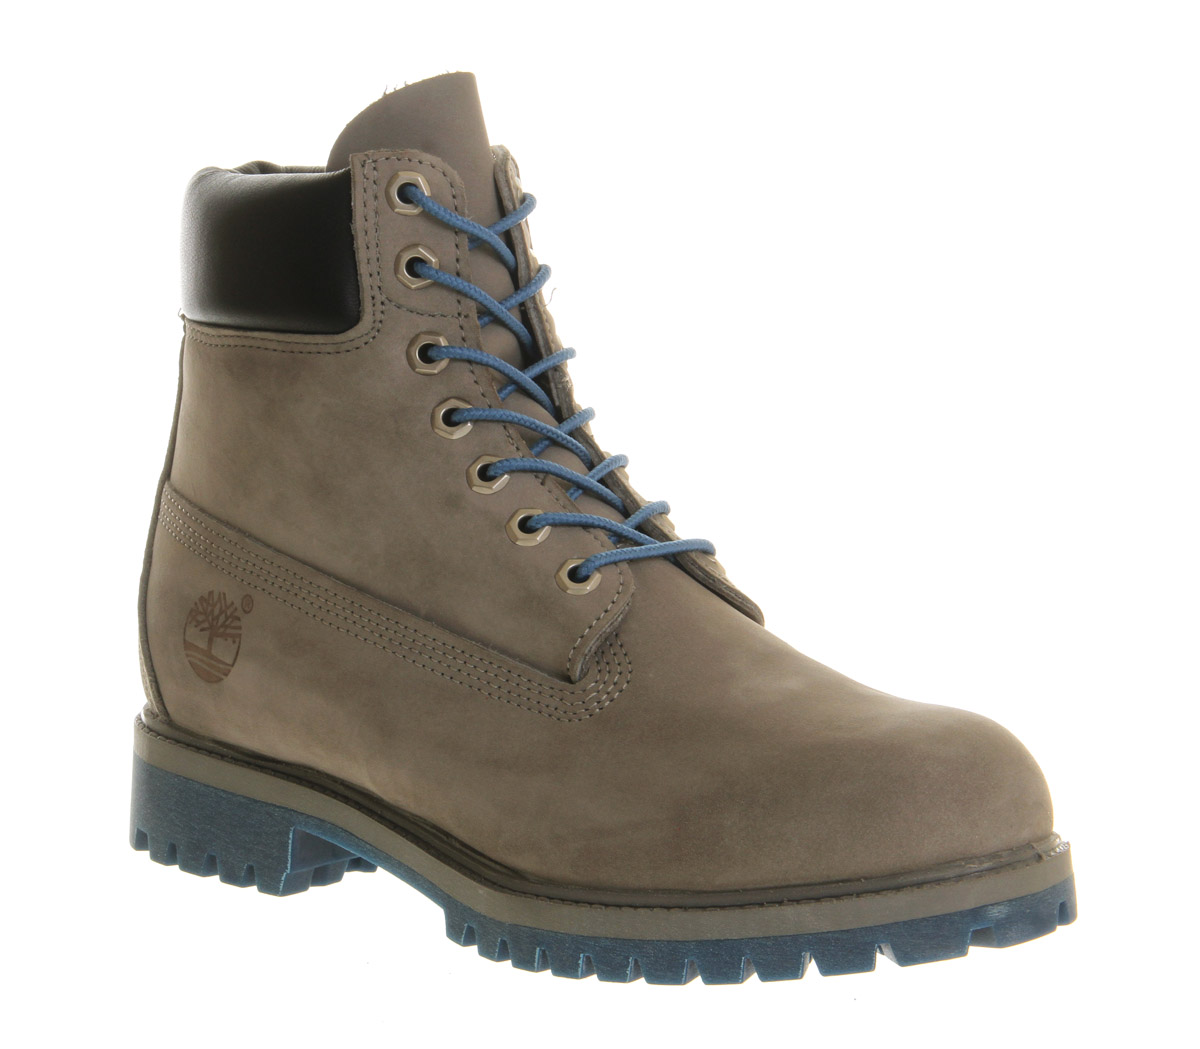 Timberland Exclusive 6 Inch Boot Grey Nubuck Blue Sole - Men’s Boots